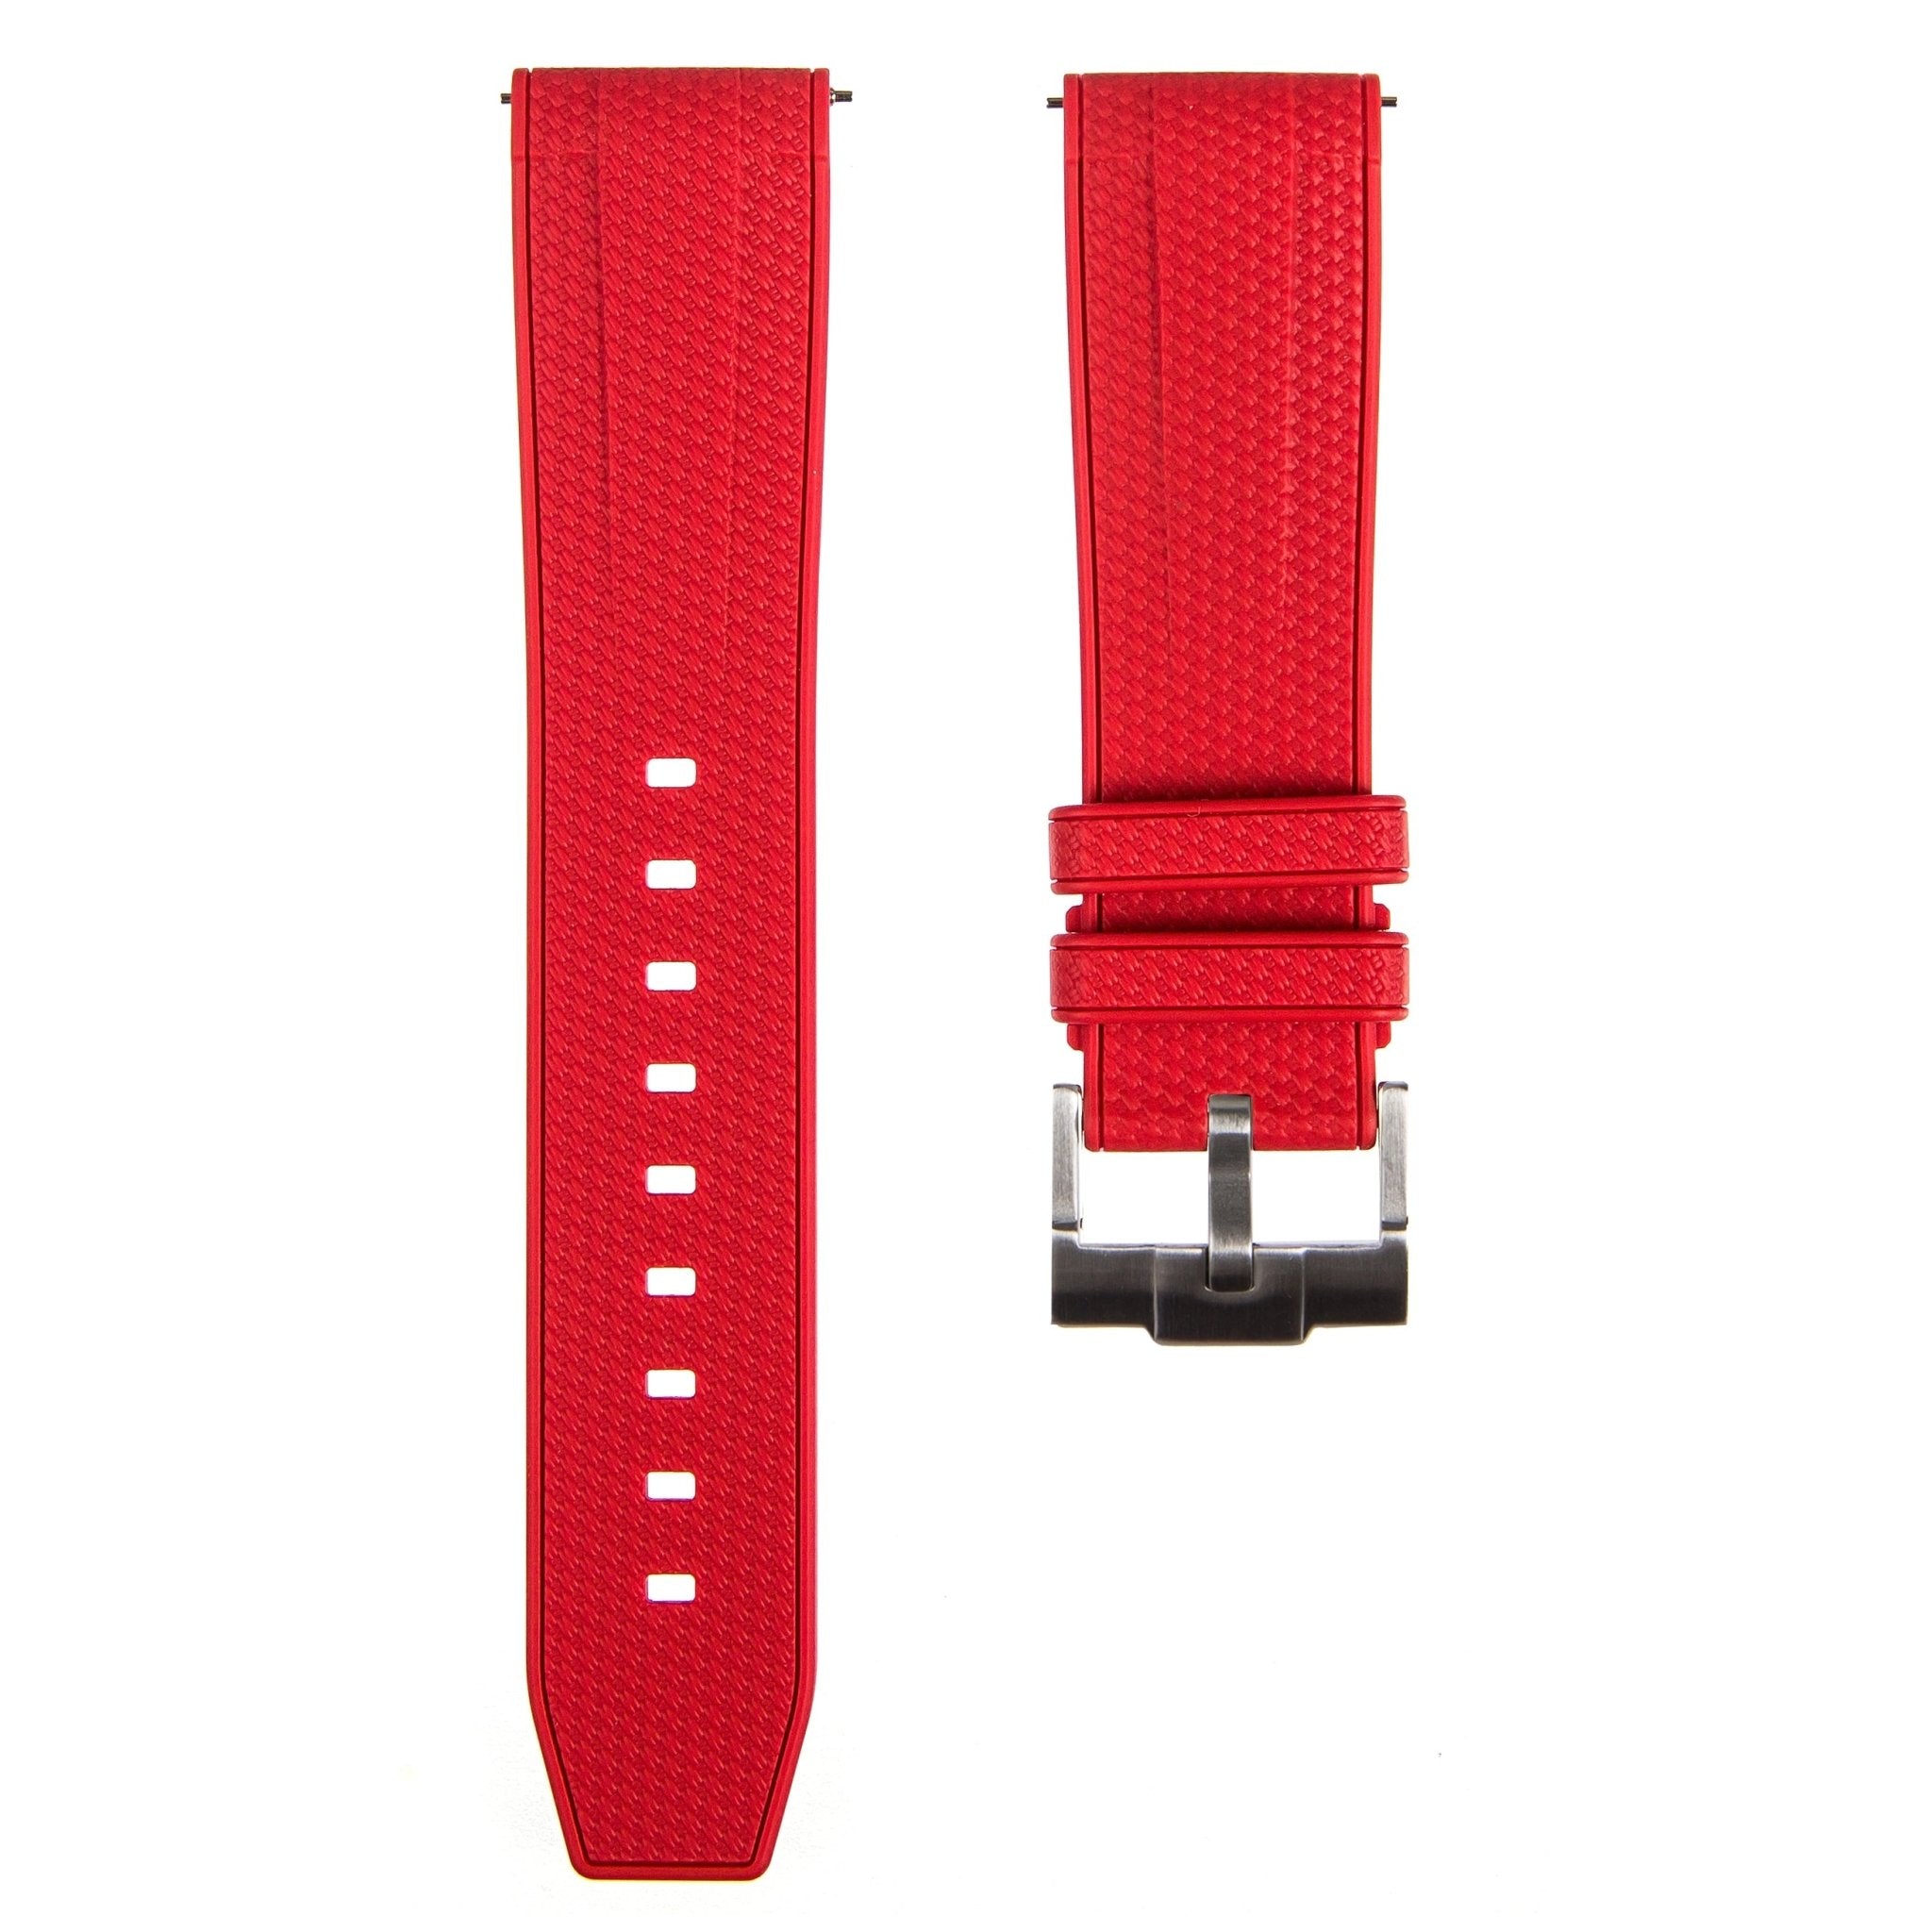 Flexweave Premium SIlicone Rubber Strap - Quick-Release - Compatible with Omega Moonwatch – Red (2423) -Strapseeker